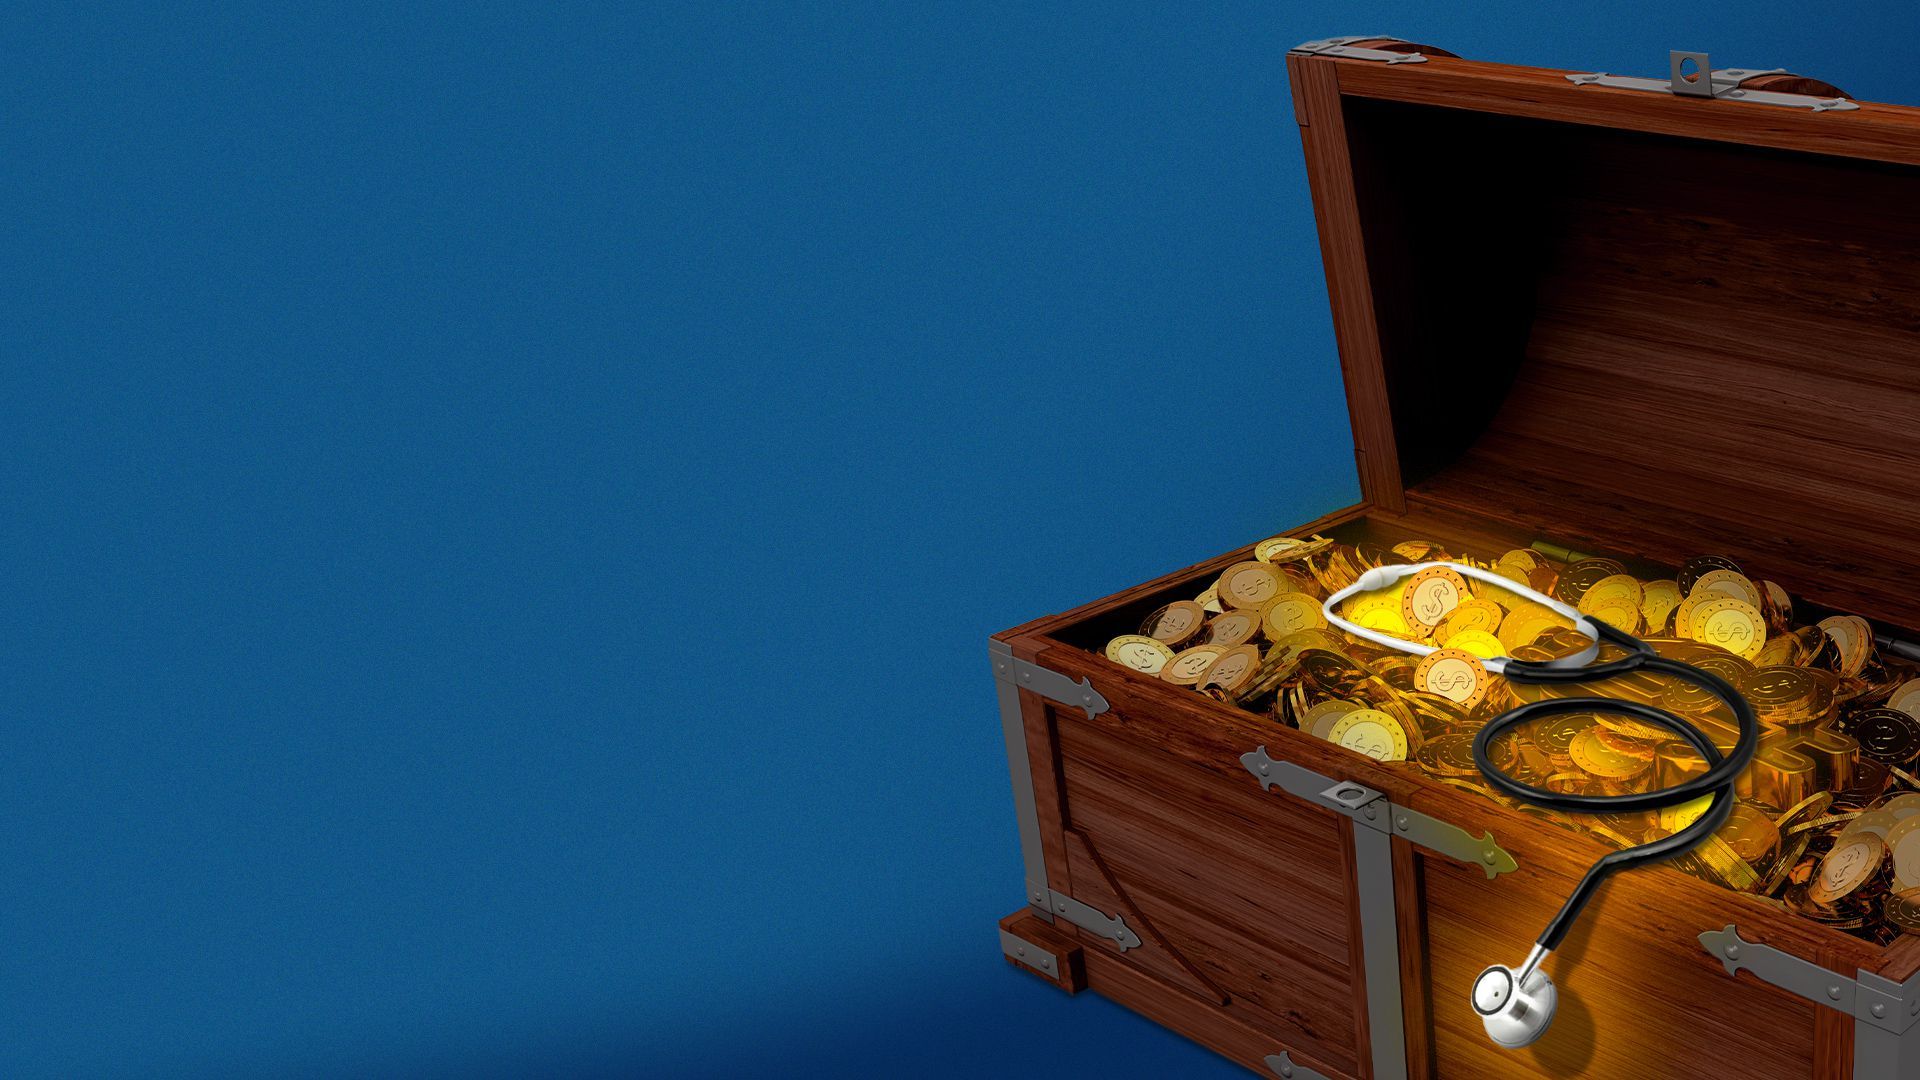 Illustration of a treasure chest full of coins and a stethoscope.